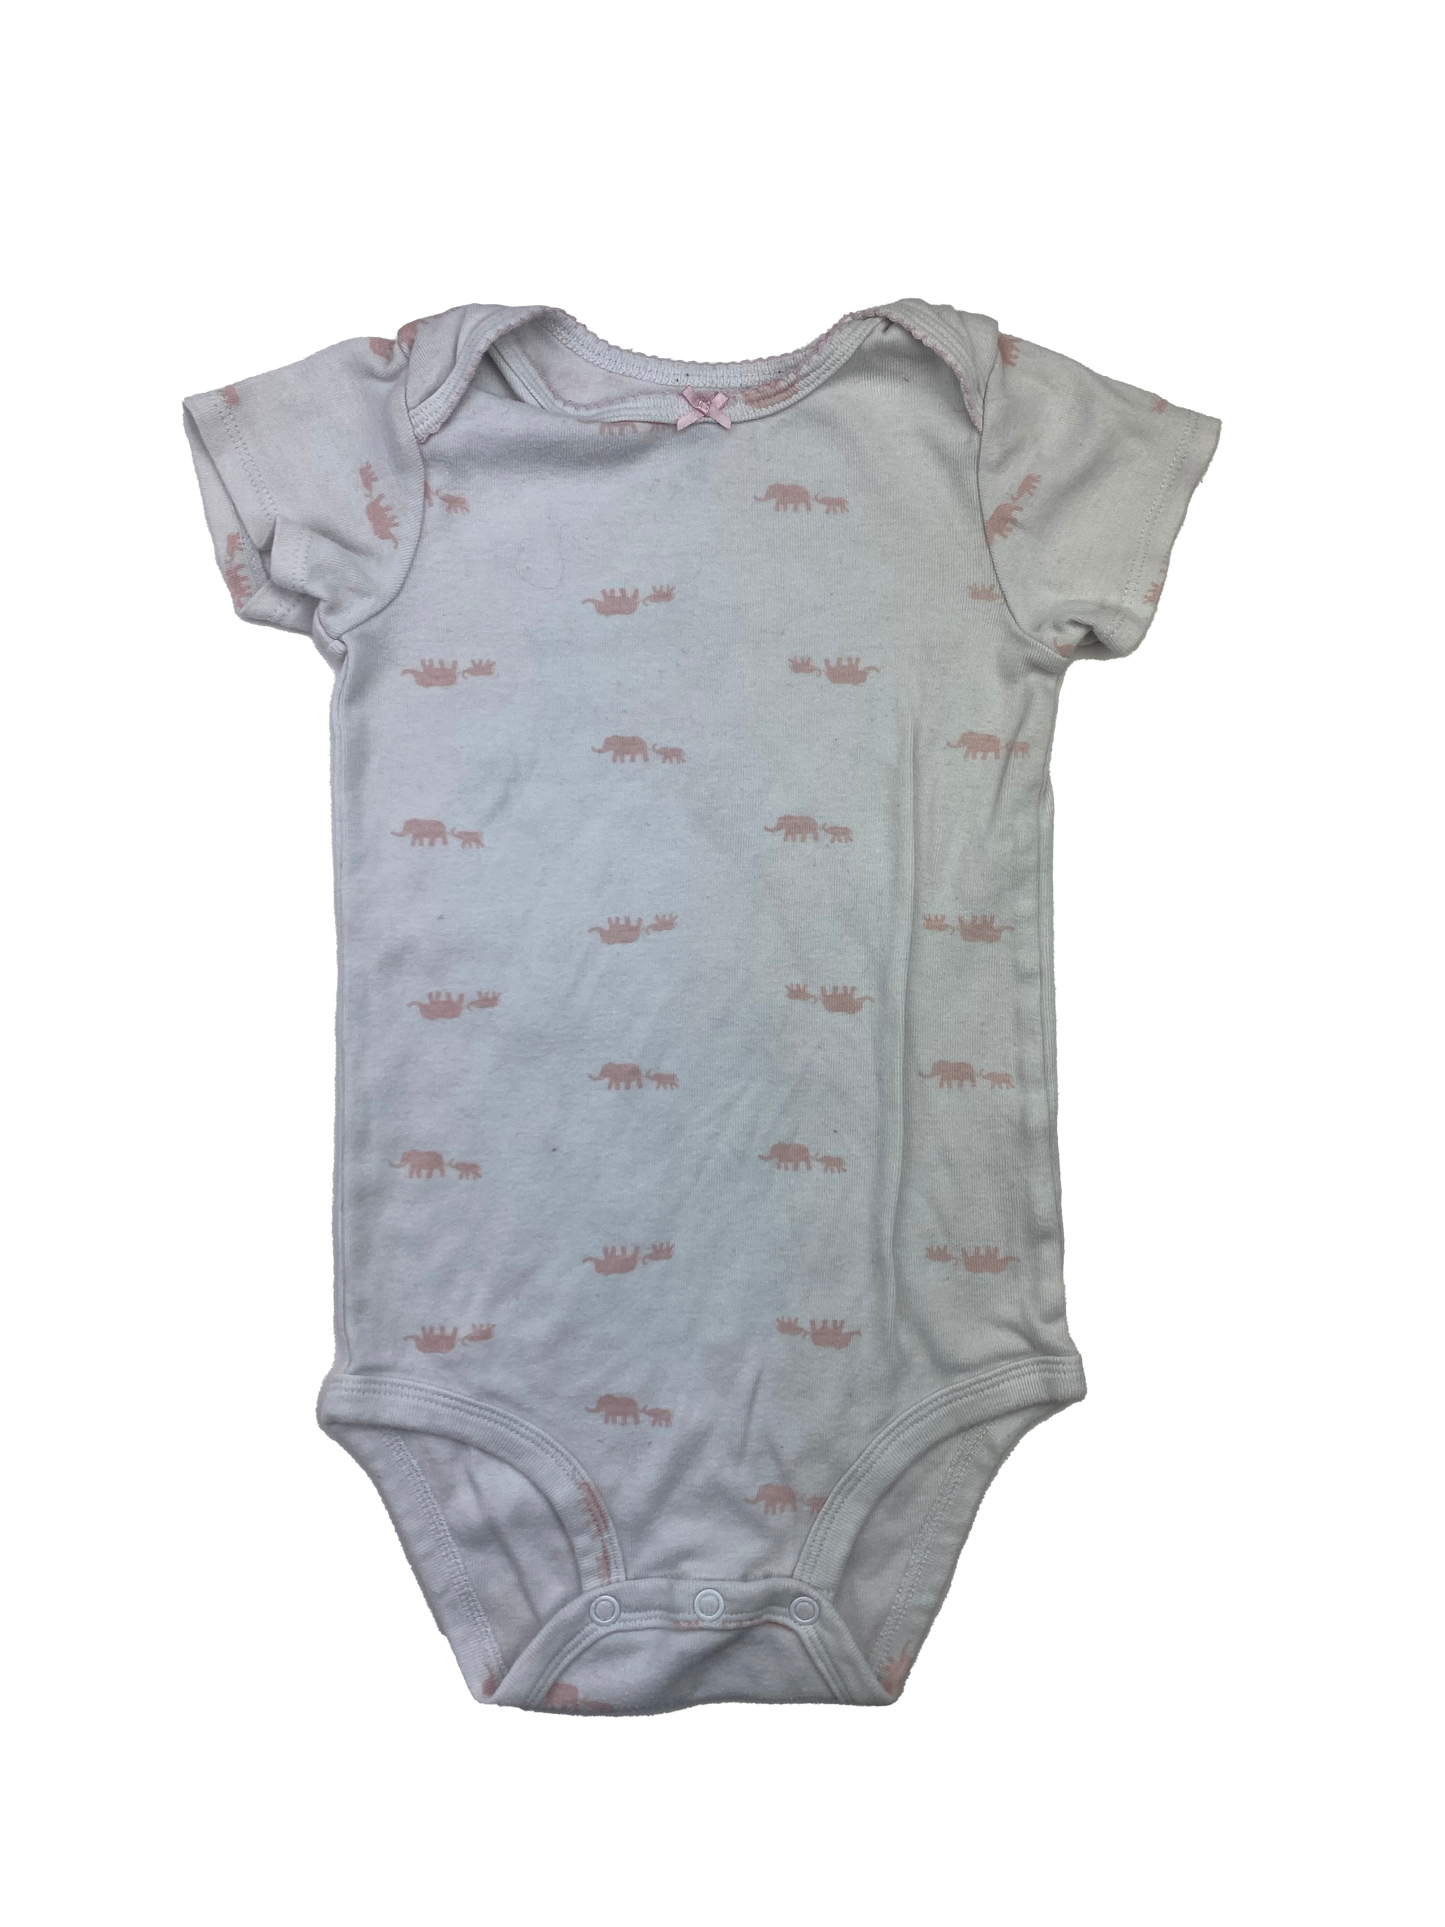 Carter's White Onesie with Pink Elephants 24M